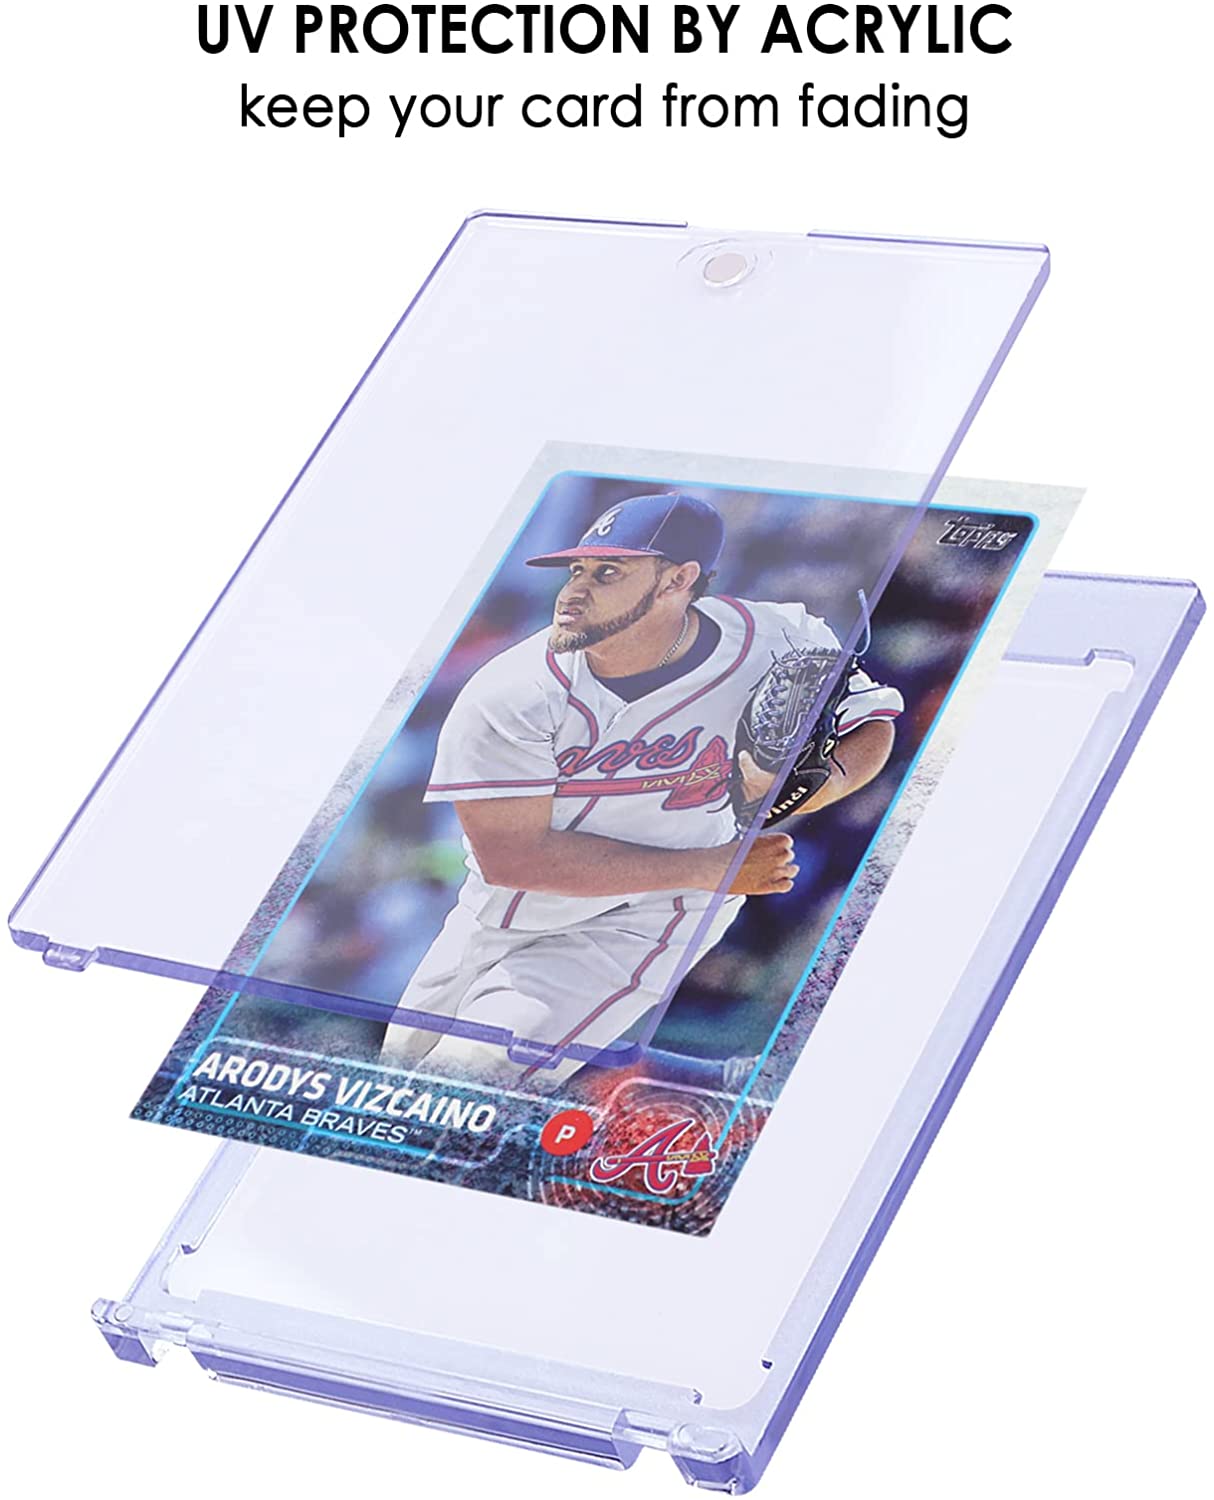 10 Count Magnetic Card Holder 35pt for Trading Cards, Baseball Card Protector Case Magnet Top Loaders with UV Protection Acrylic Screw Down Fit for TCG, MTG, Football, Sports Cards